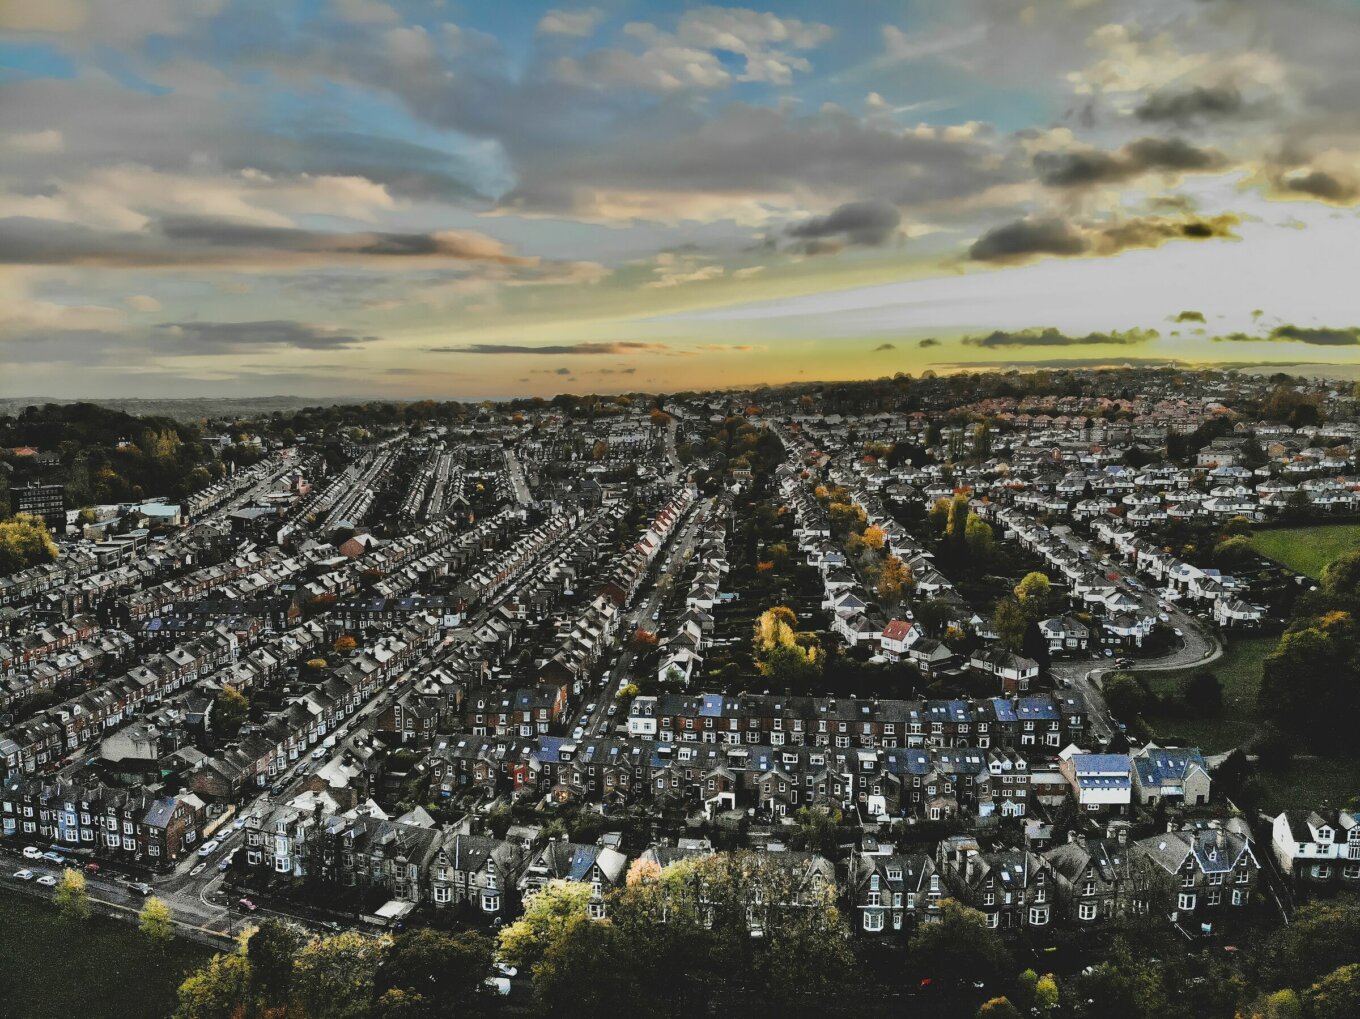 An aerial view of a city with lots of houses.